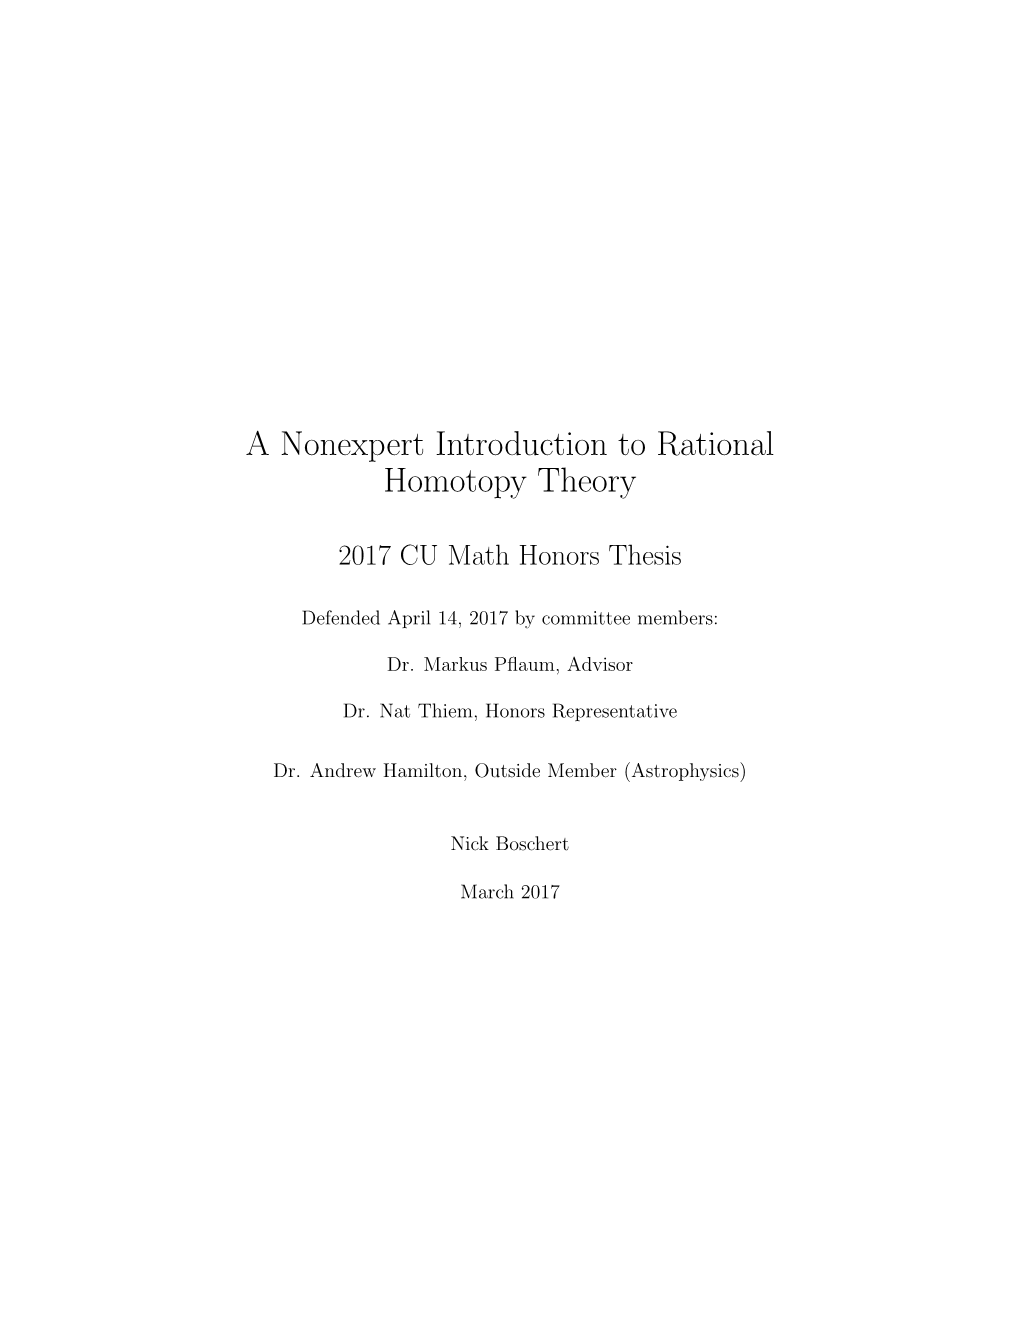 A Nonexpert Introduction to Rational Homotopy Theory